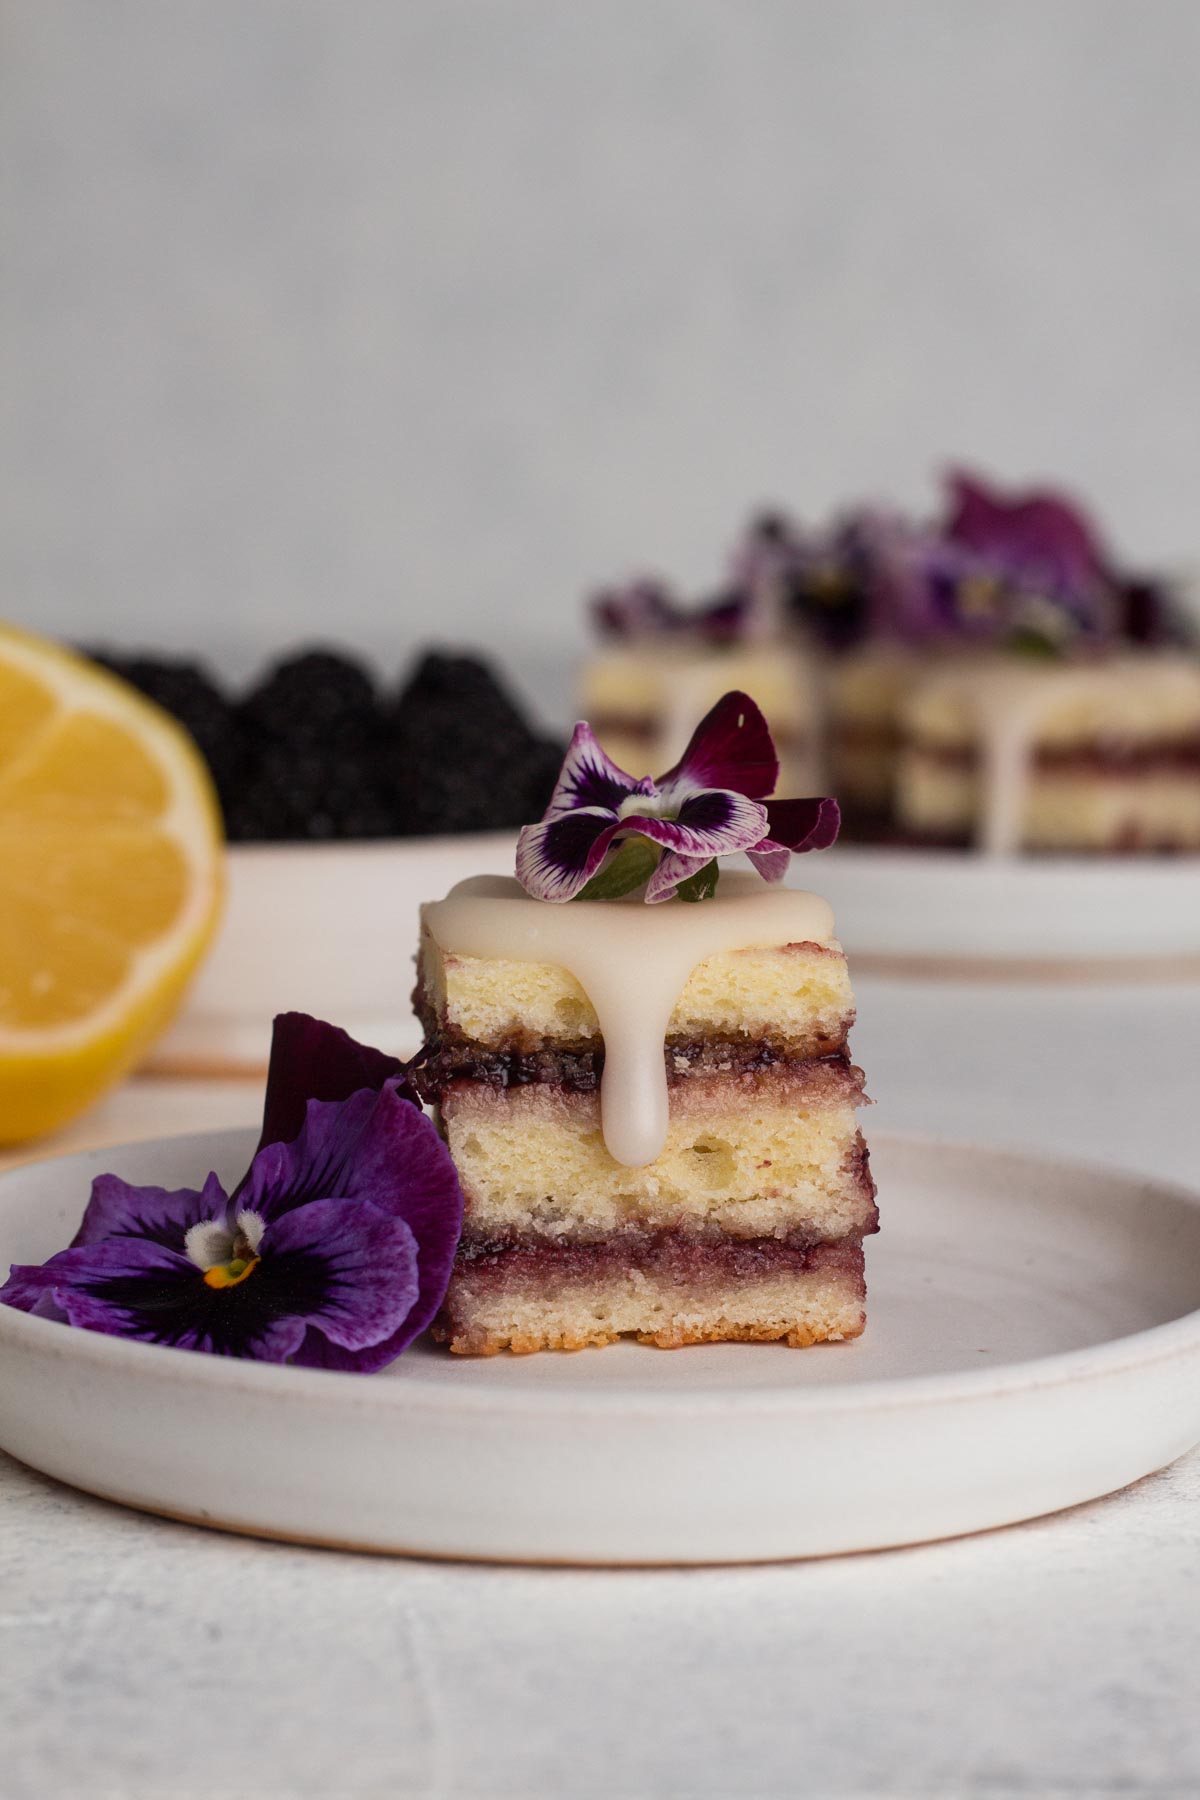 Side view of a petit four on a white plate topped with dripping glaze and purple pansy flowers.